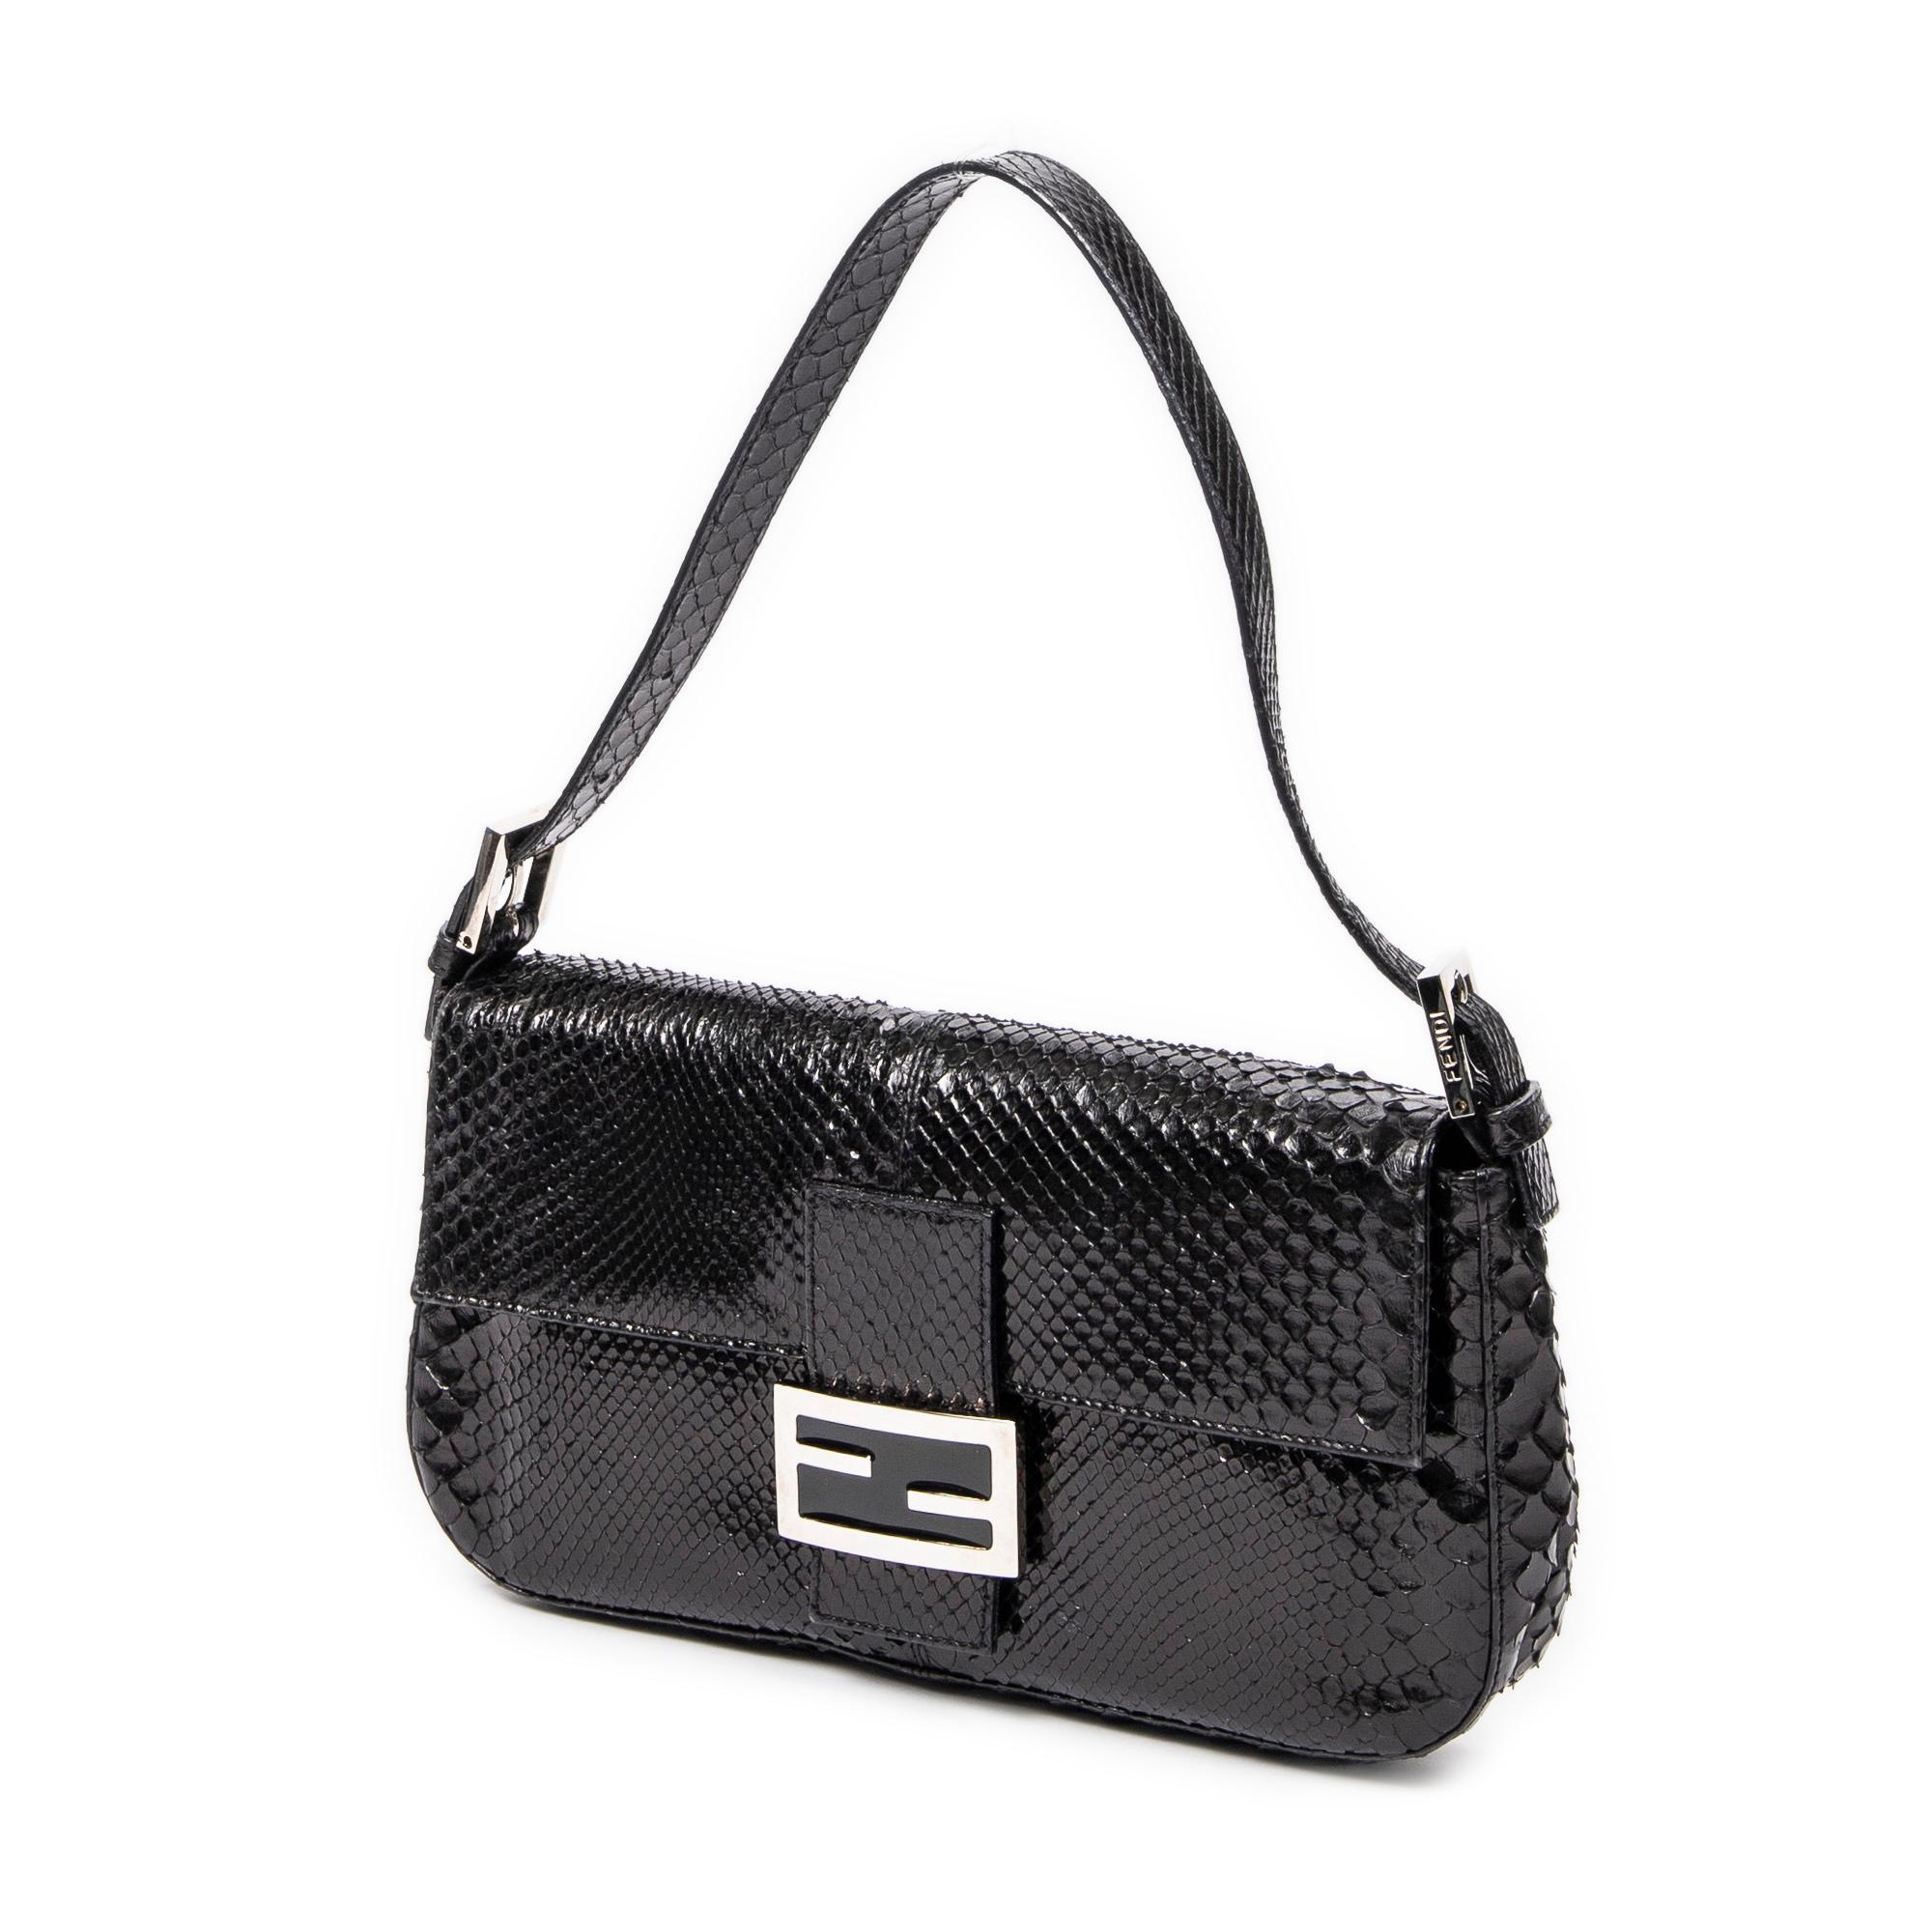 Introducing the Fendi Black Baguette: a sleek and sophisticated addition to your collection. Crafted from luxurious lizard embossed leather in classic black, this bag exudes timeless elegance. Its silver hardware adds a touch of modernity, while the